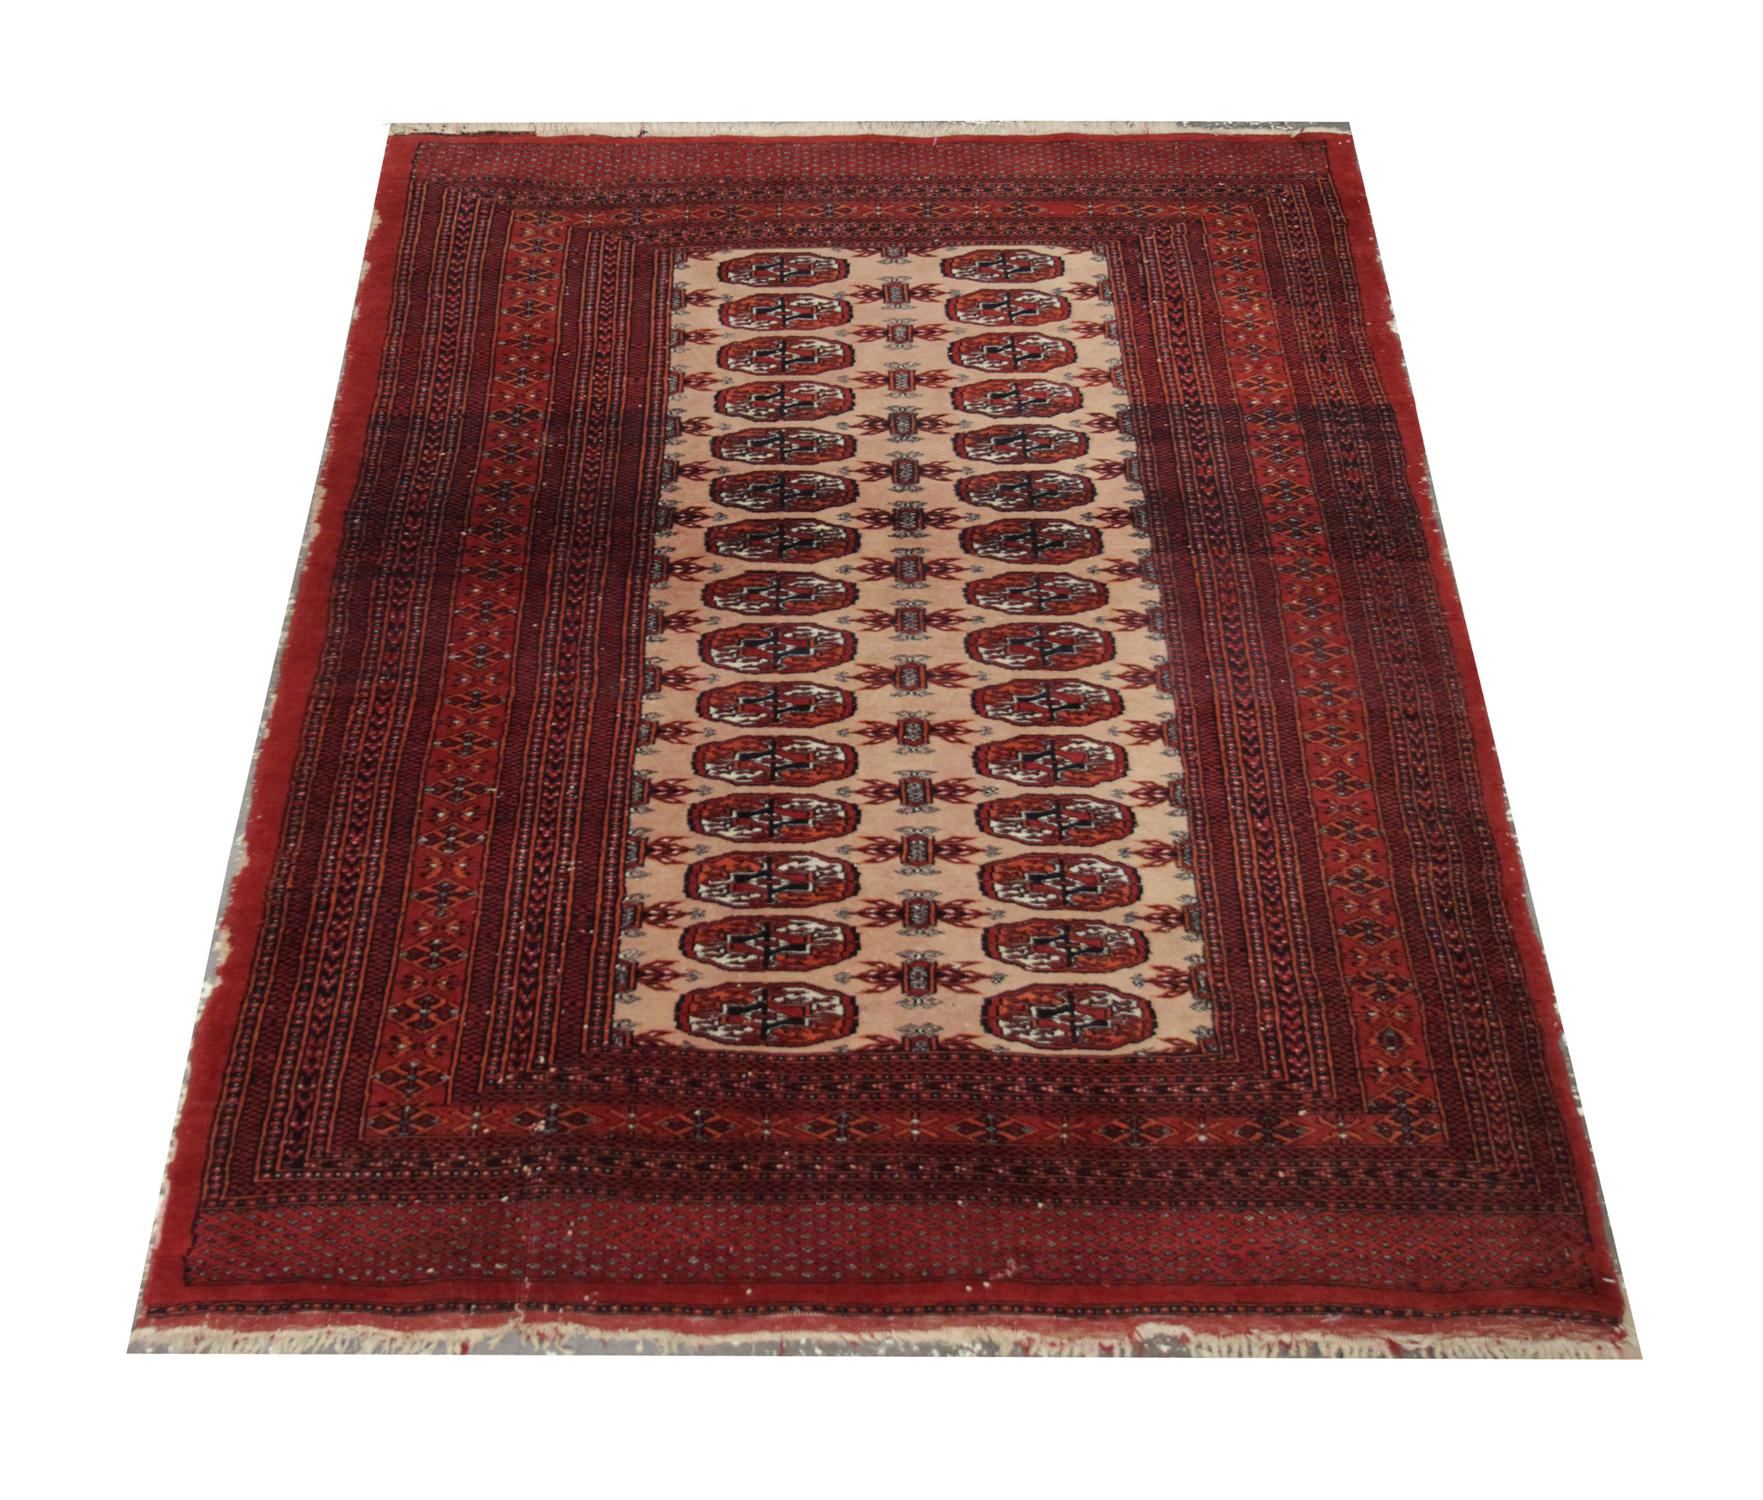 This vintage rug handmade carpet all-over design is a handwoven Turkmen rug. Handwoven with an oriental design featuring intricate octagons and stars through the centre on a cream background, enclosed by a deep red highly-detailed layered border